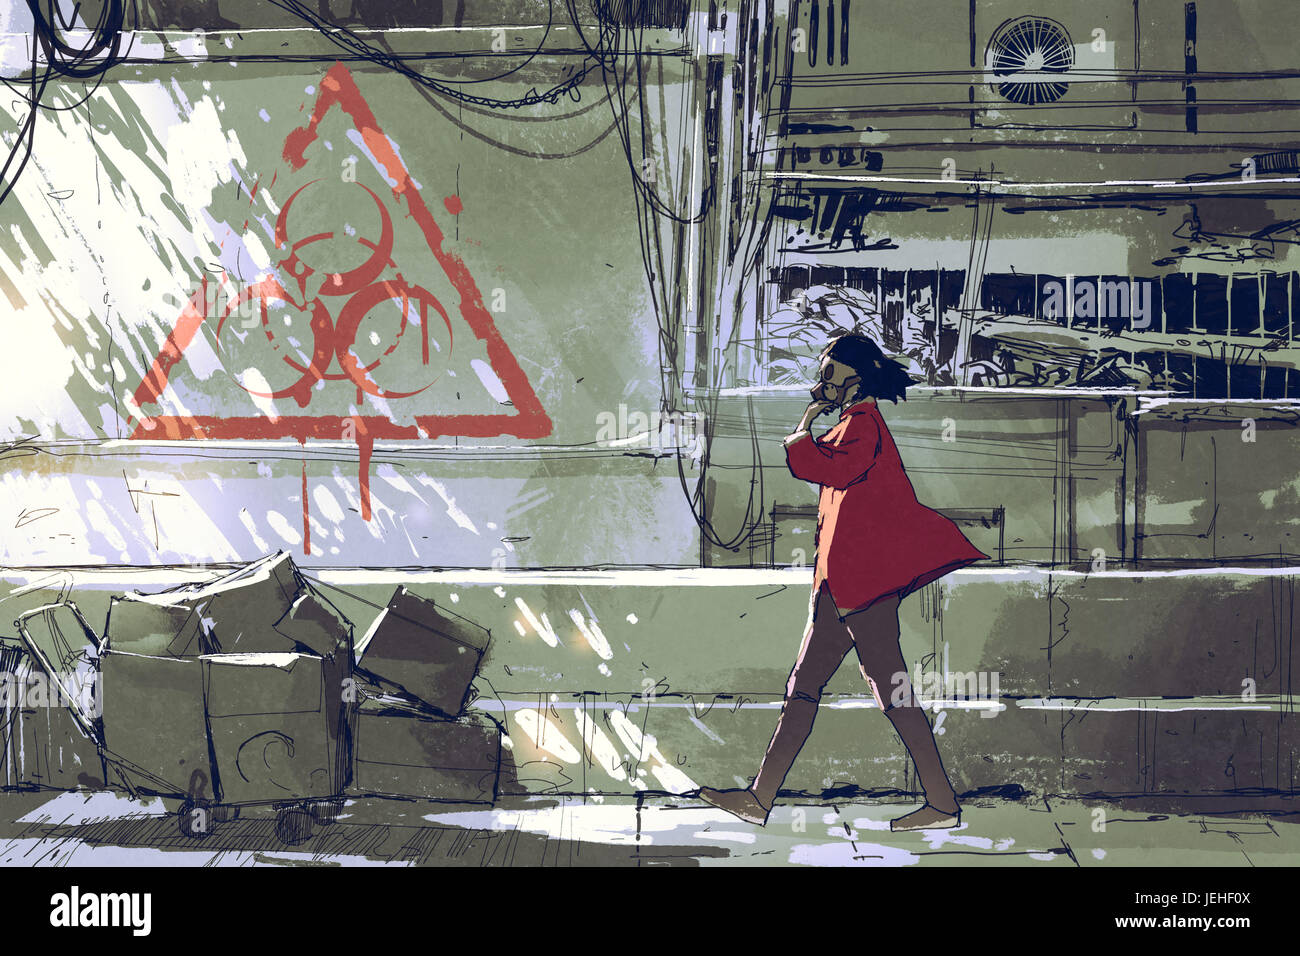 woman in red with gas masks walking on street in polluted urban with biohazard symbol on the wall, digital art style, illustration painting Stock Photo